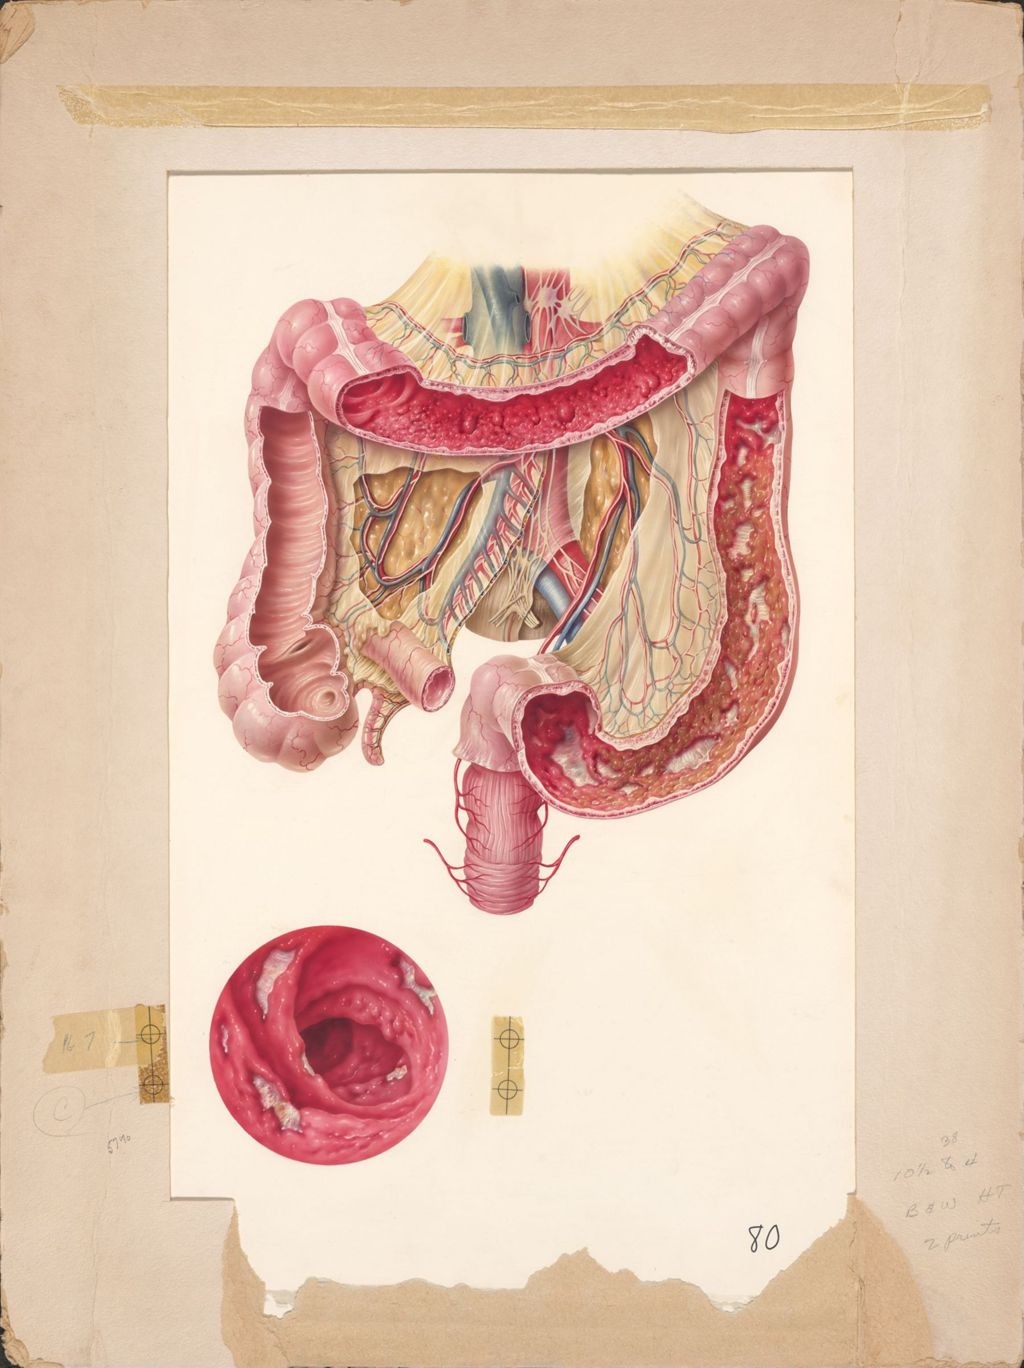 Miniature of Artwork of intestines with cross sections and close up section showing inside of intestine